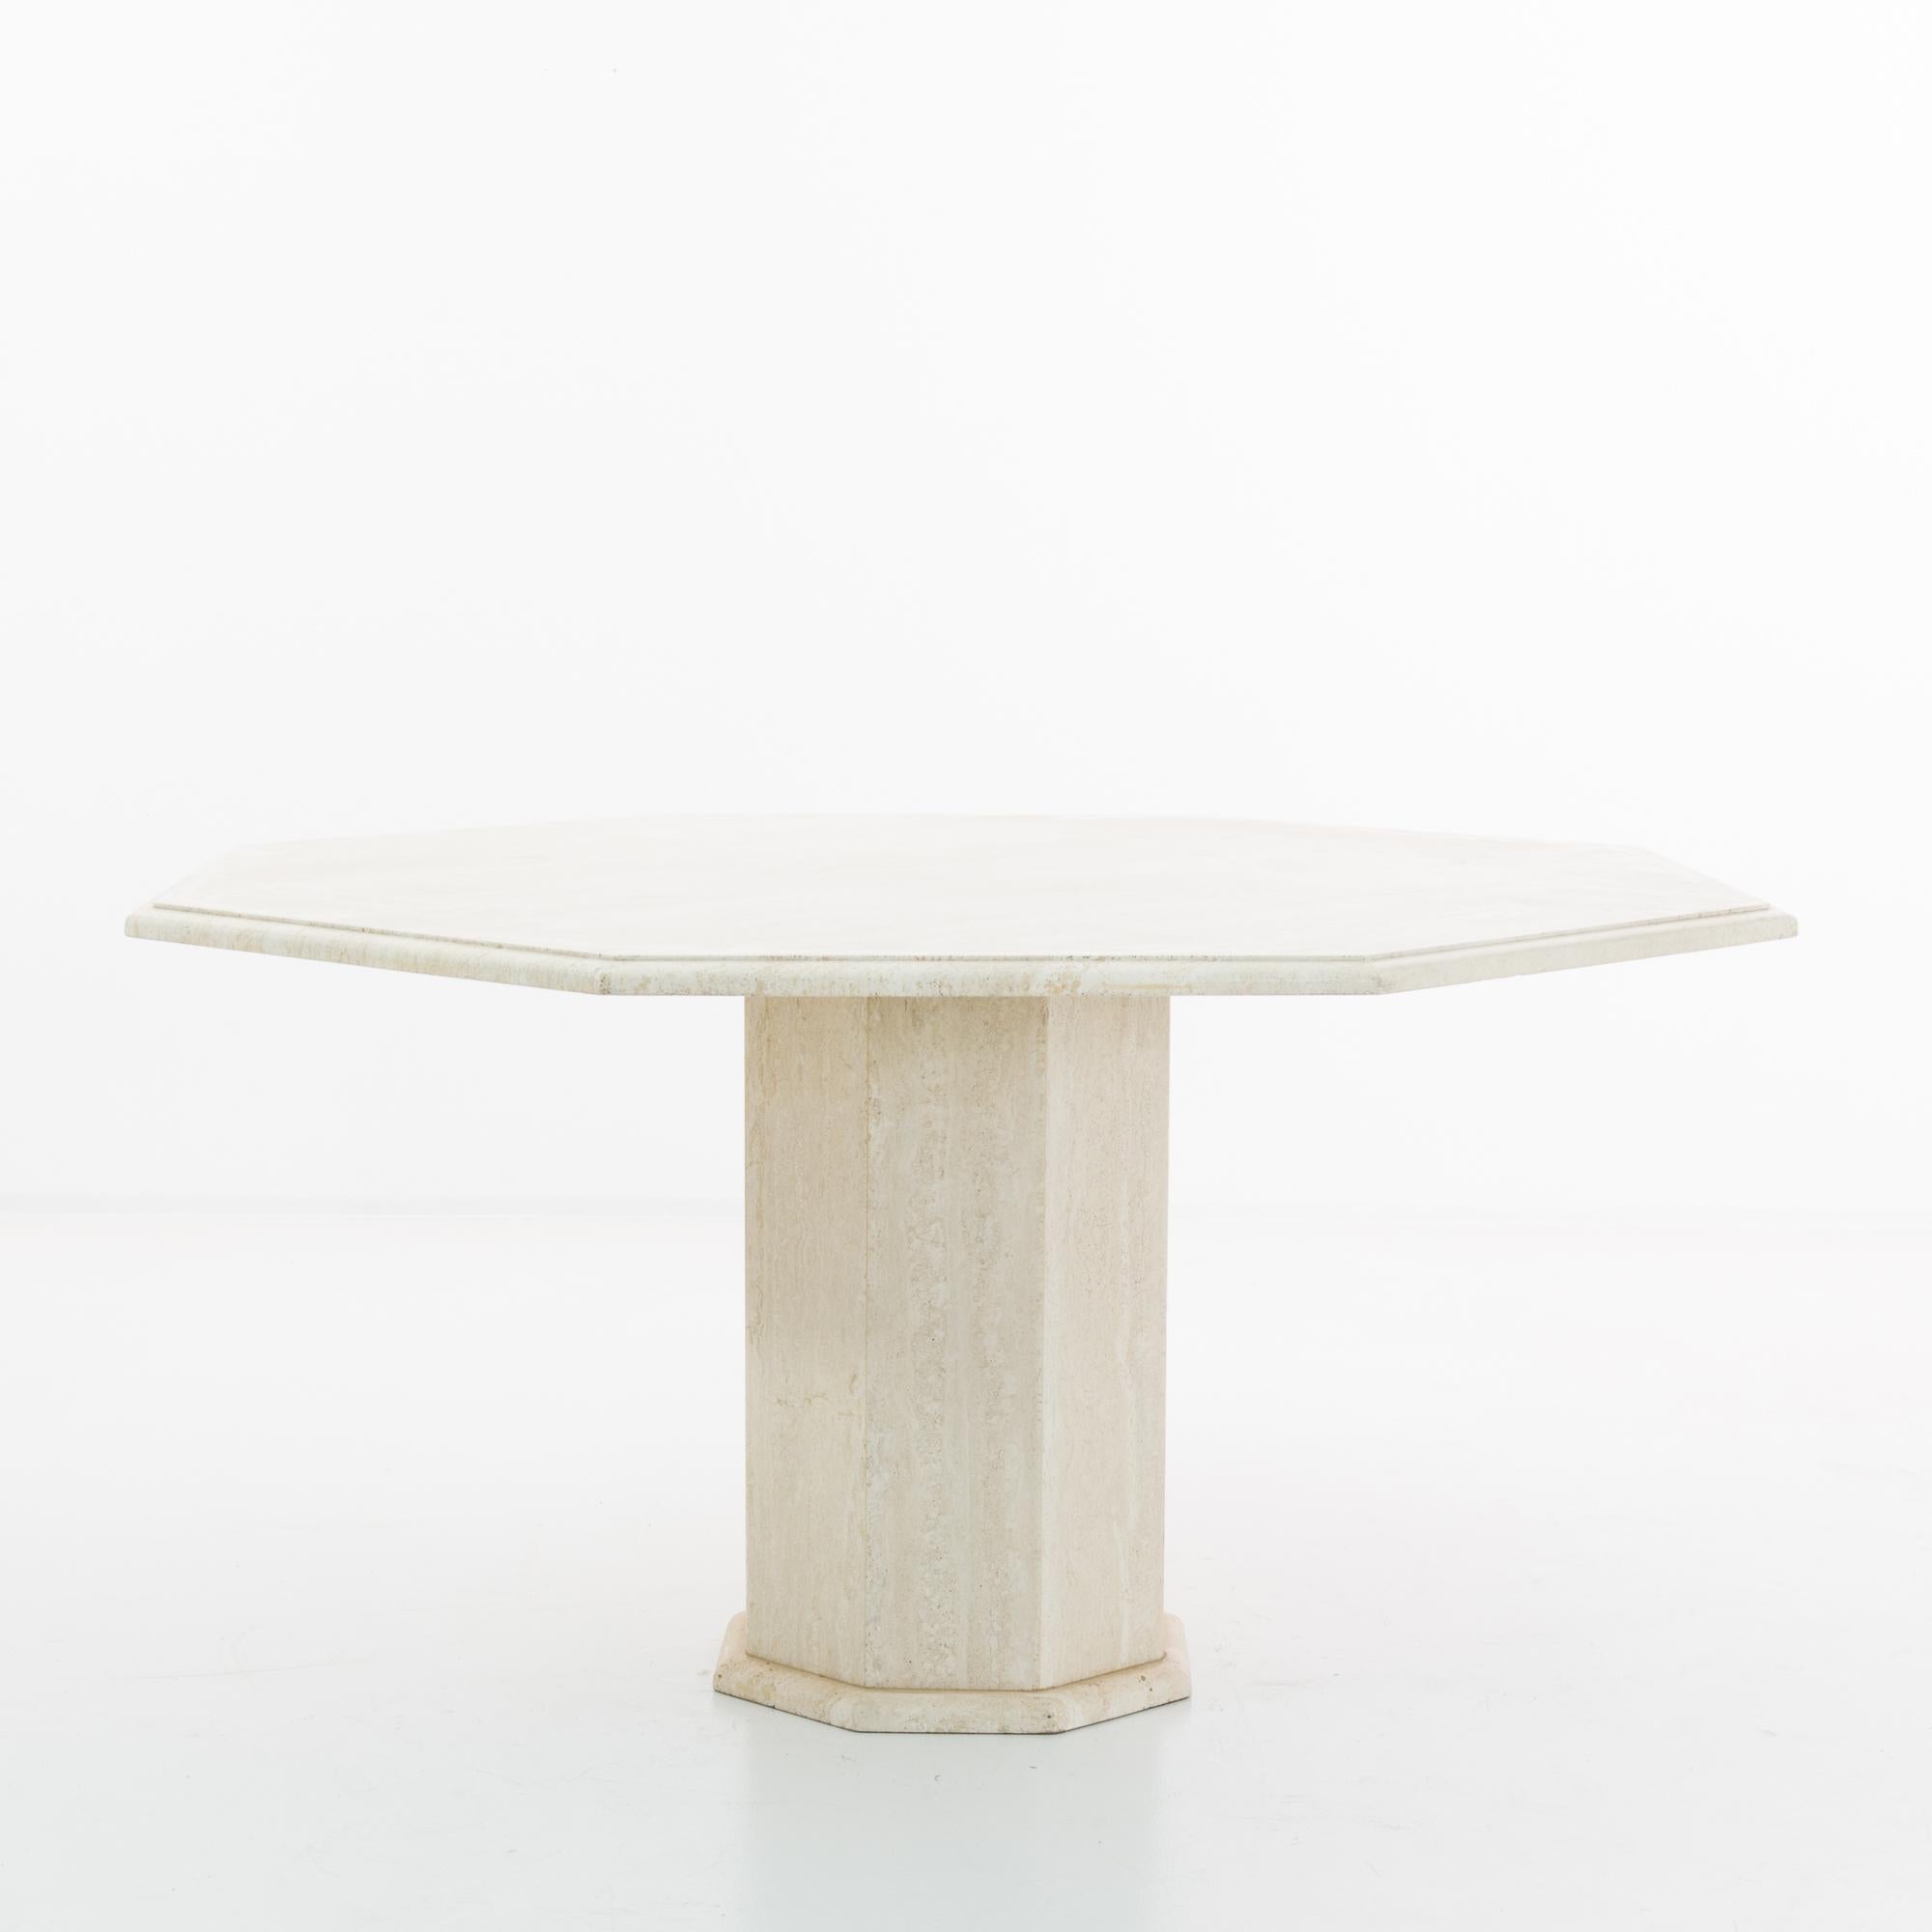 This travertine dining table was made in Italy, circa 1970. Graphic and minimalist, the classical sensibility of travertine lends a monumental quality to the modern silhouette. A ogee edged octagonal tabletop sits atop a faceted column of stone; the